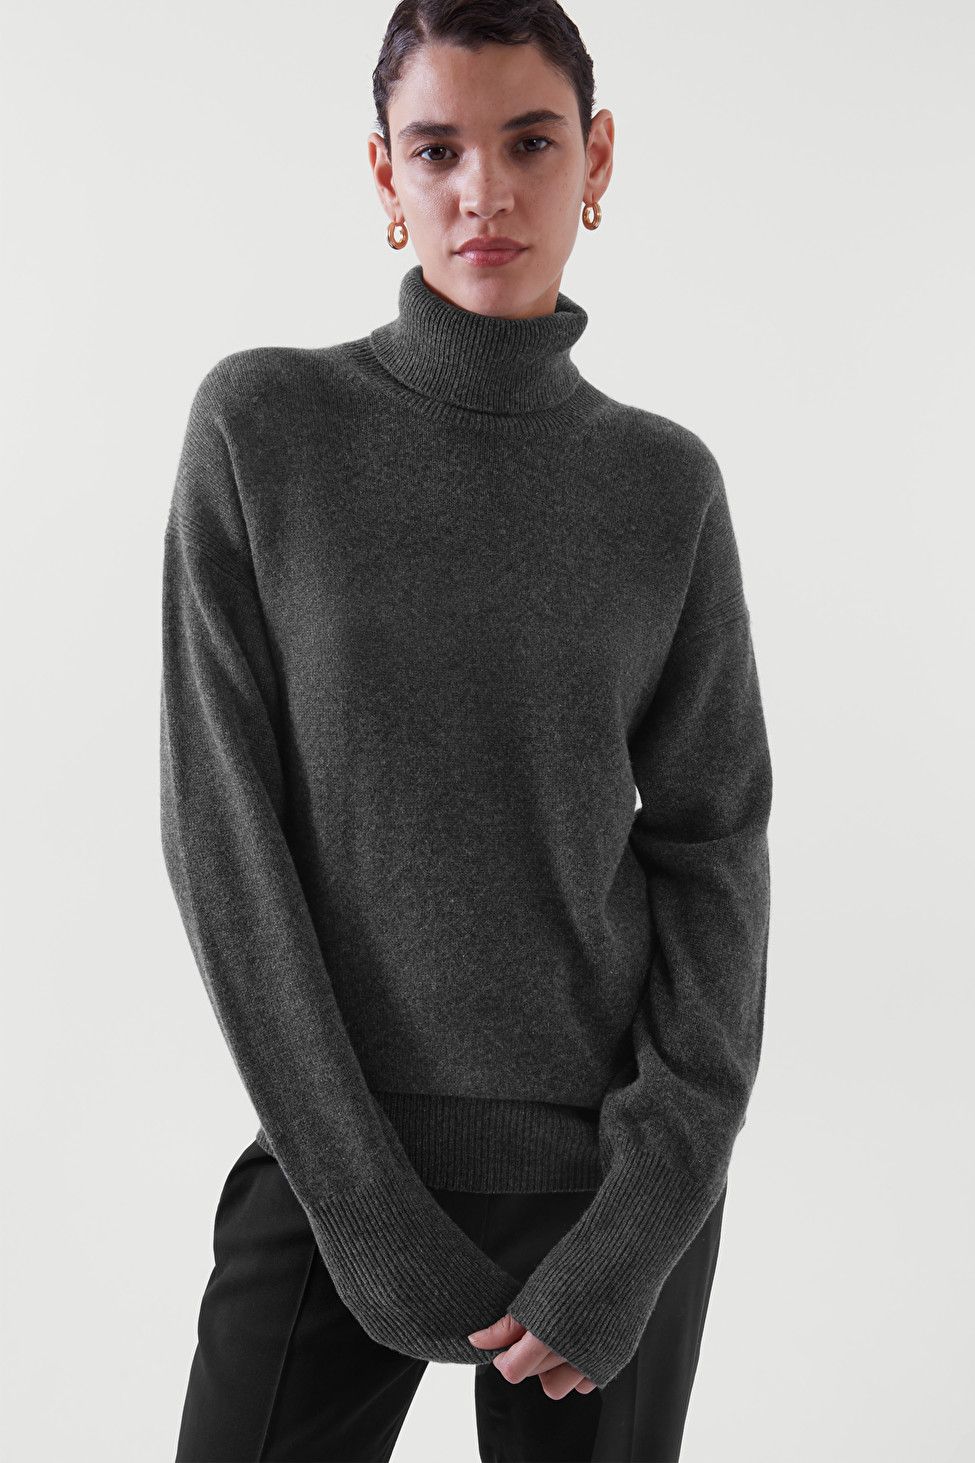 The 12 best women's cashmere jumpers to buy now